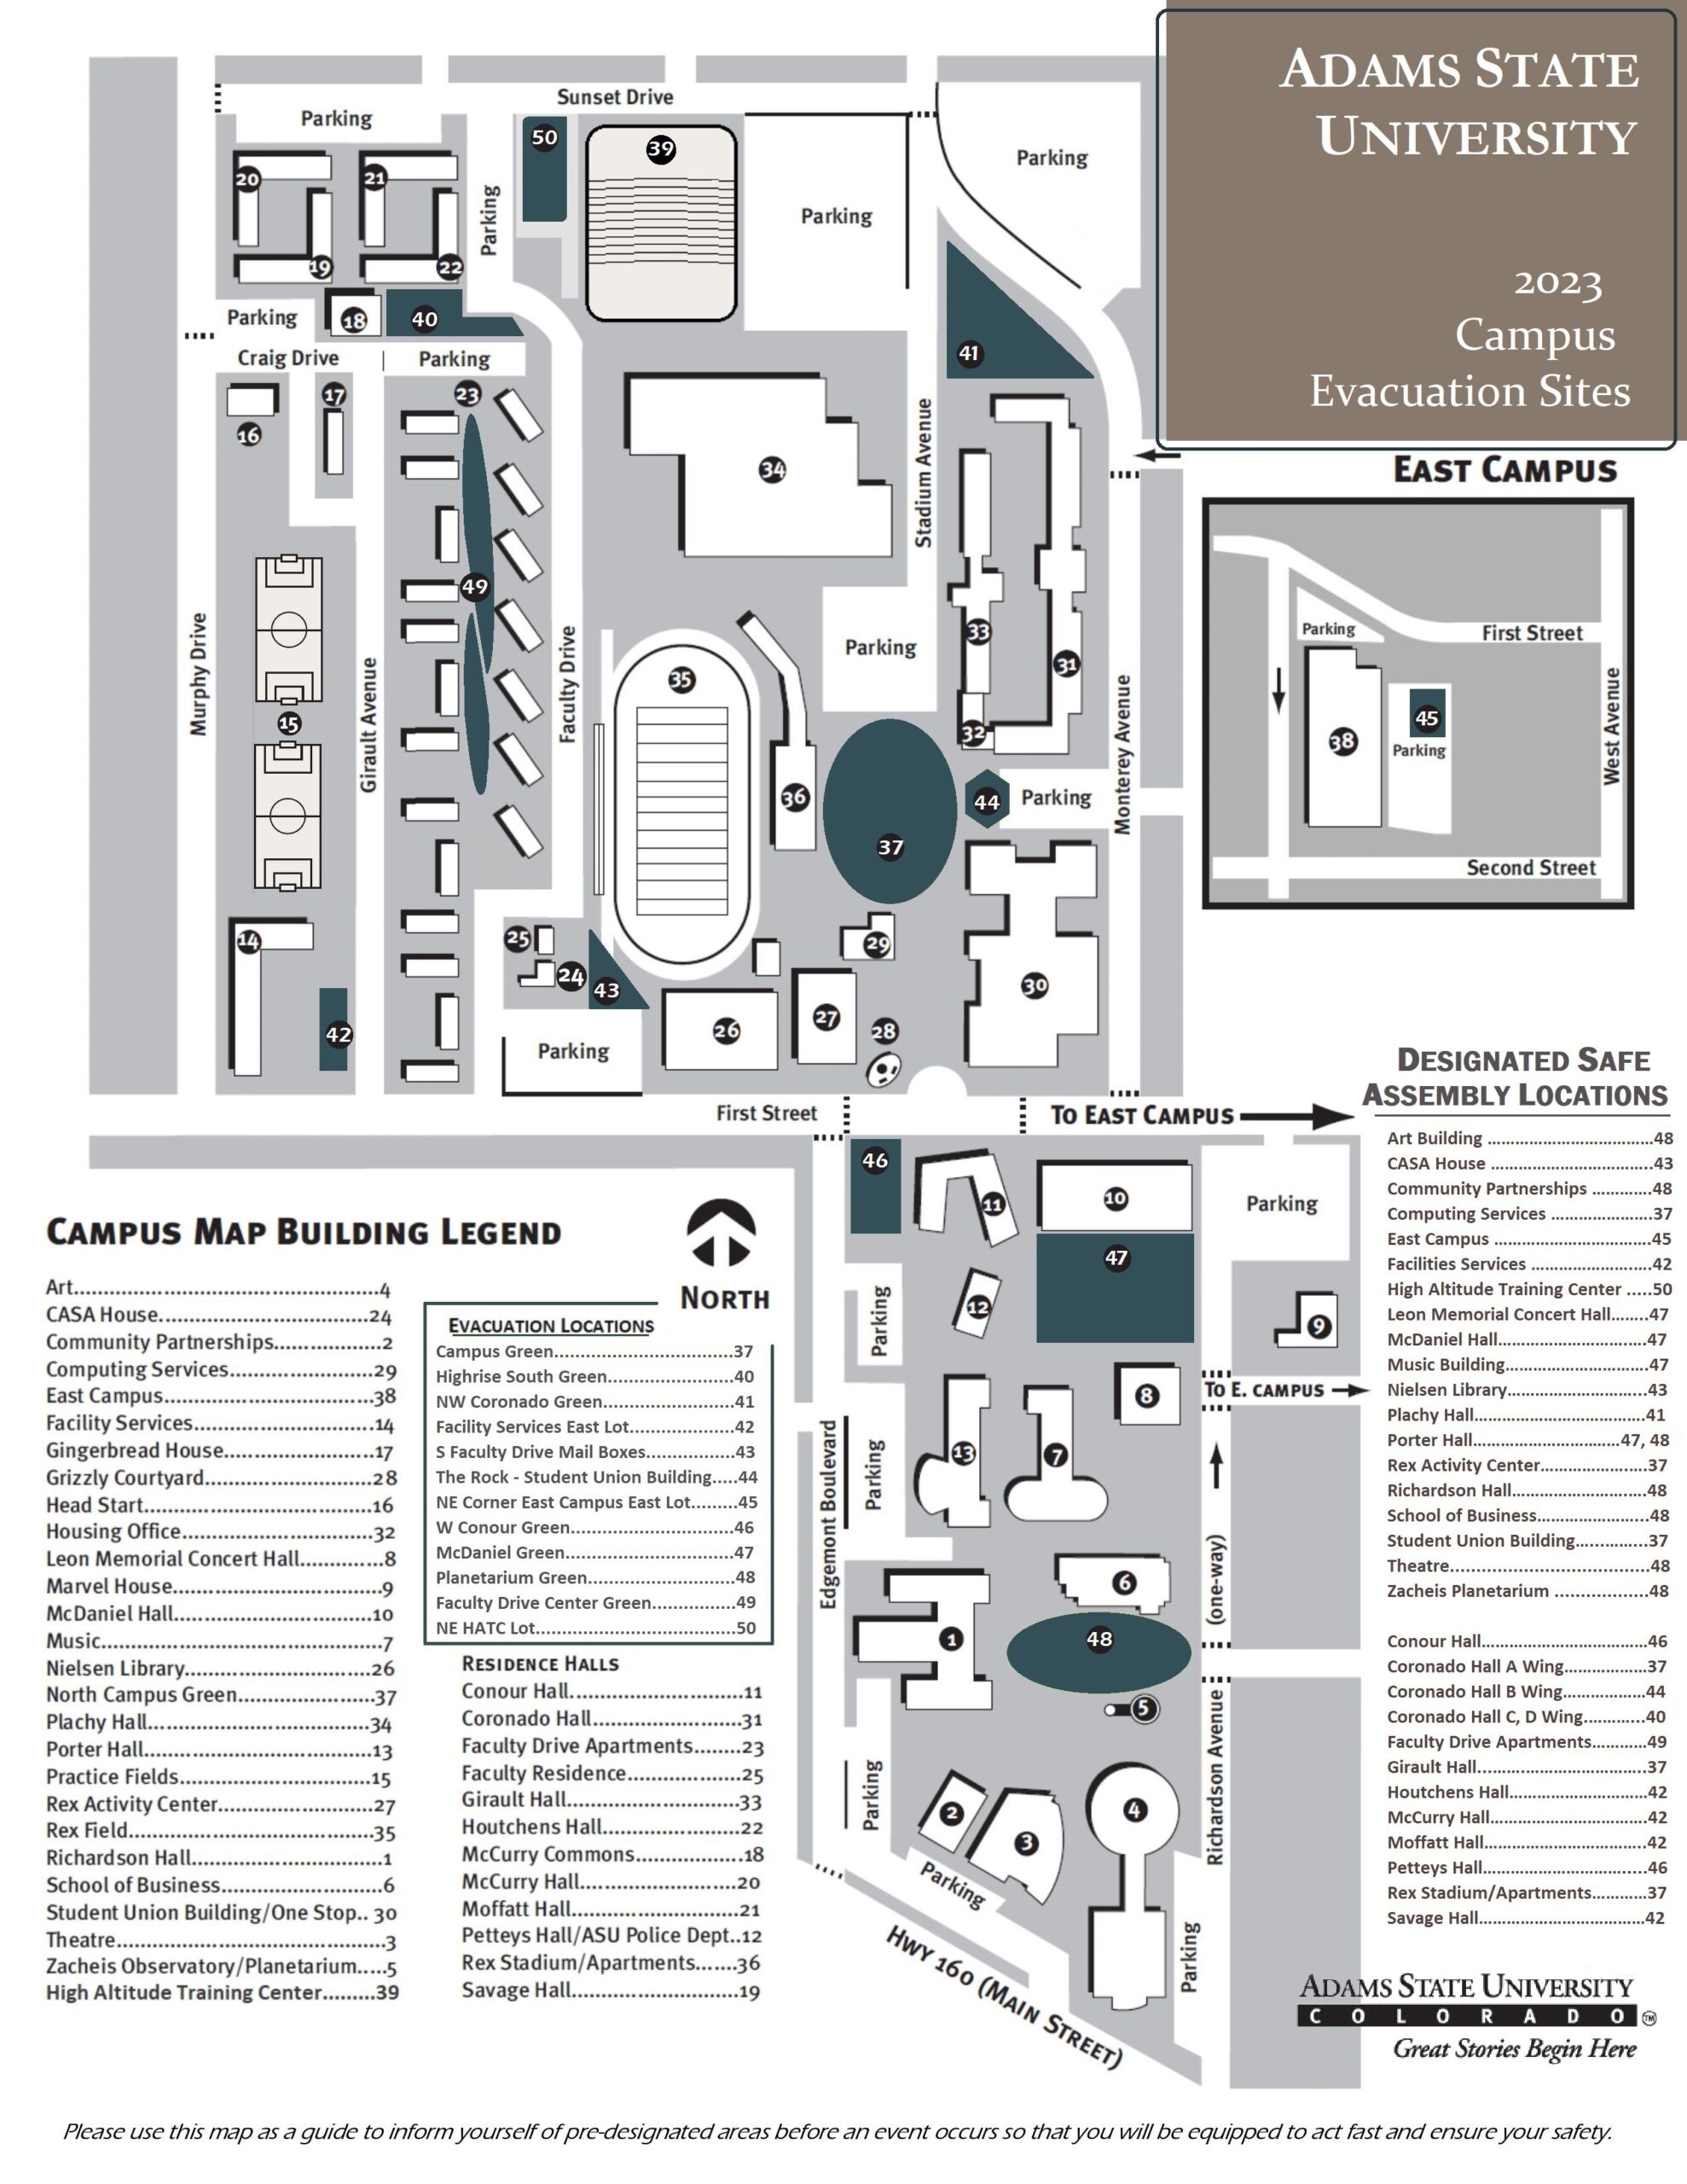 DESIGNATED SAFE ASSEMBLY LOCATIONS Art Building ………………………………48 CASA House ………………………….….43 Community Partnerships ………….48 Computing Services ………………….37 East Campus …………………………….45 Facility Services ……………………....42 High Altitude Training Center .....50 Leon Memorial Concert Hall……..47 McDaniel Hall……………………….….47 Music Building………………………….47 Nielsen Library………………………...43 Plachy Hall……………………………….41 Porter Hall………………………….47, 48 Rex Activity Center……………….….37 Richardson Hall…………………….….48 School of Business…………………...48 Student Union Building…...……...37 Theatre......................................48 Zacheis Planetarium ..................48 Conour Hall………………………………46 Coronado Hall A Wing………………37 Coronado Hall B Wing………………44 Coronado Hall C, D Wing.………...41 Faculty Drive Apartments…………49 Girault Hall...…….……………………..37 Houtchens Hall…………………………40 McCurry Hall…………………………….40 Moffatt Hall……………………………..40 Petteys Hall………………………….....46 Rex Stadium/Apartments…………37 Savage Hall……………………………...40 Campus Green…………………………….....37 Highrise South Green……………………...40 NW Coronado Green……………………….41 Facility Services East Lot………………….42 S Faculty Drive Mail Boxes……………...43 The Rock - Student Union Building....44 NE Corner East Campus East Lot……..45 W Conour Green…………………………….46 McDaniel Green………………………….....47 Planetarium Green…………………………48 Faculty Drive Center Green…………….49 NE HATC Lot……………………………….....50 